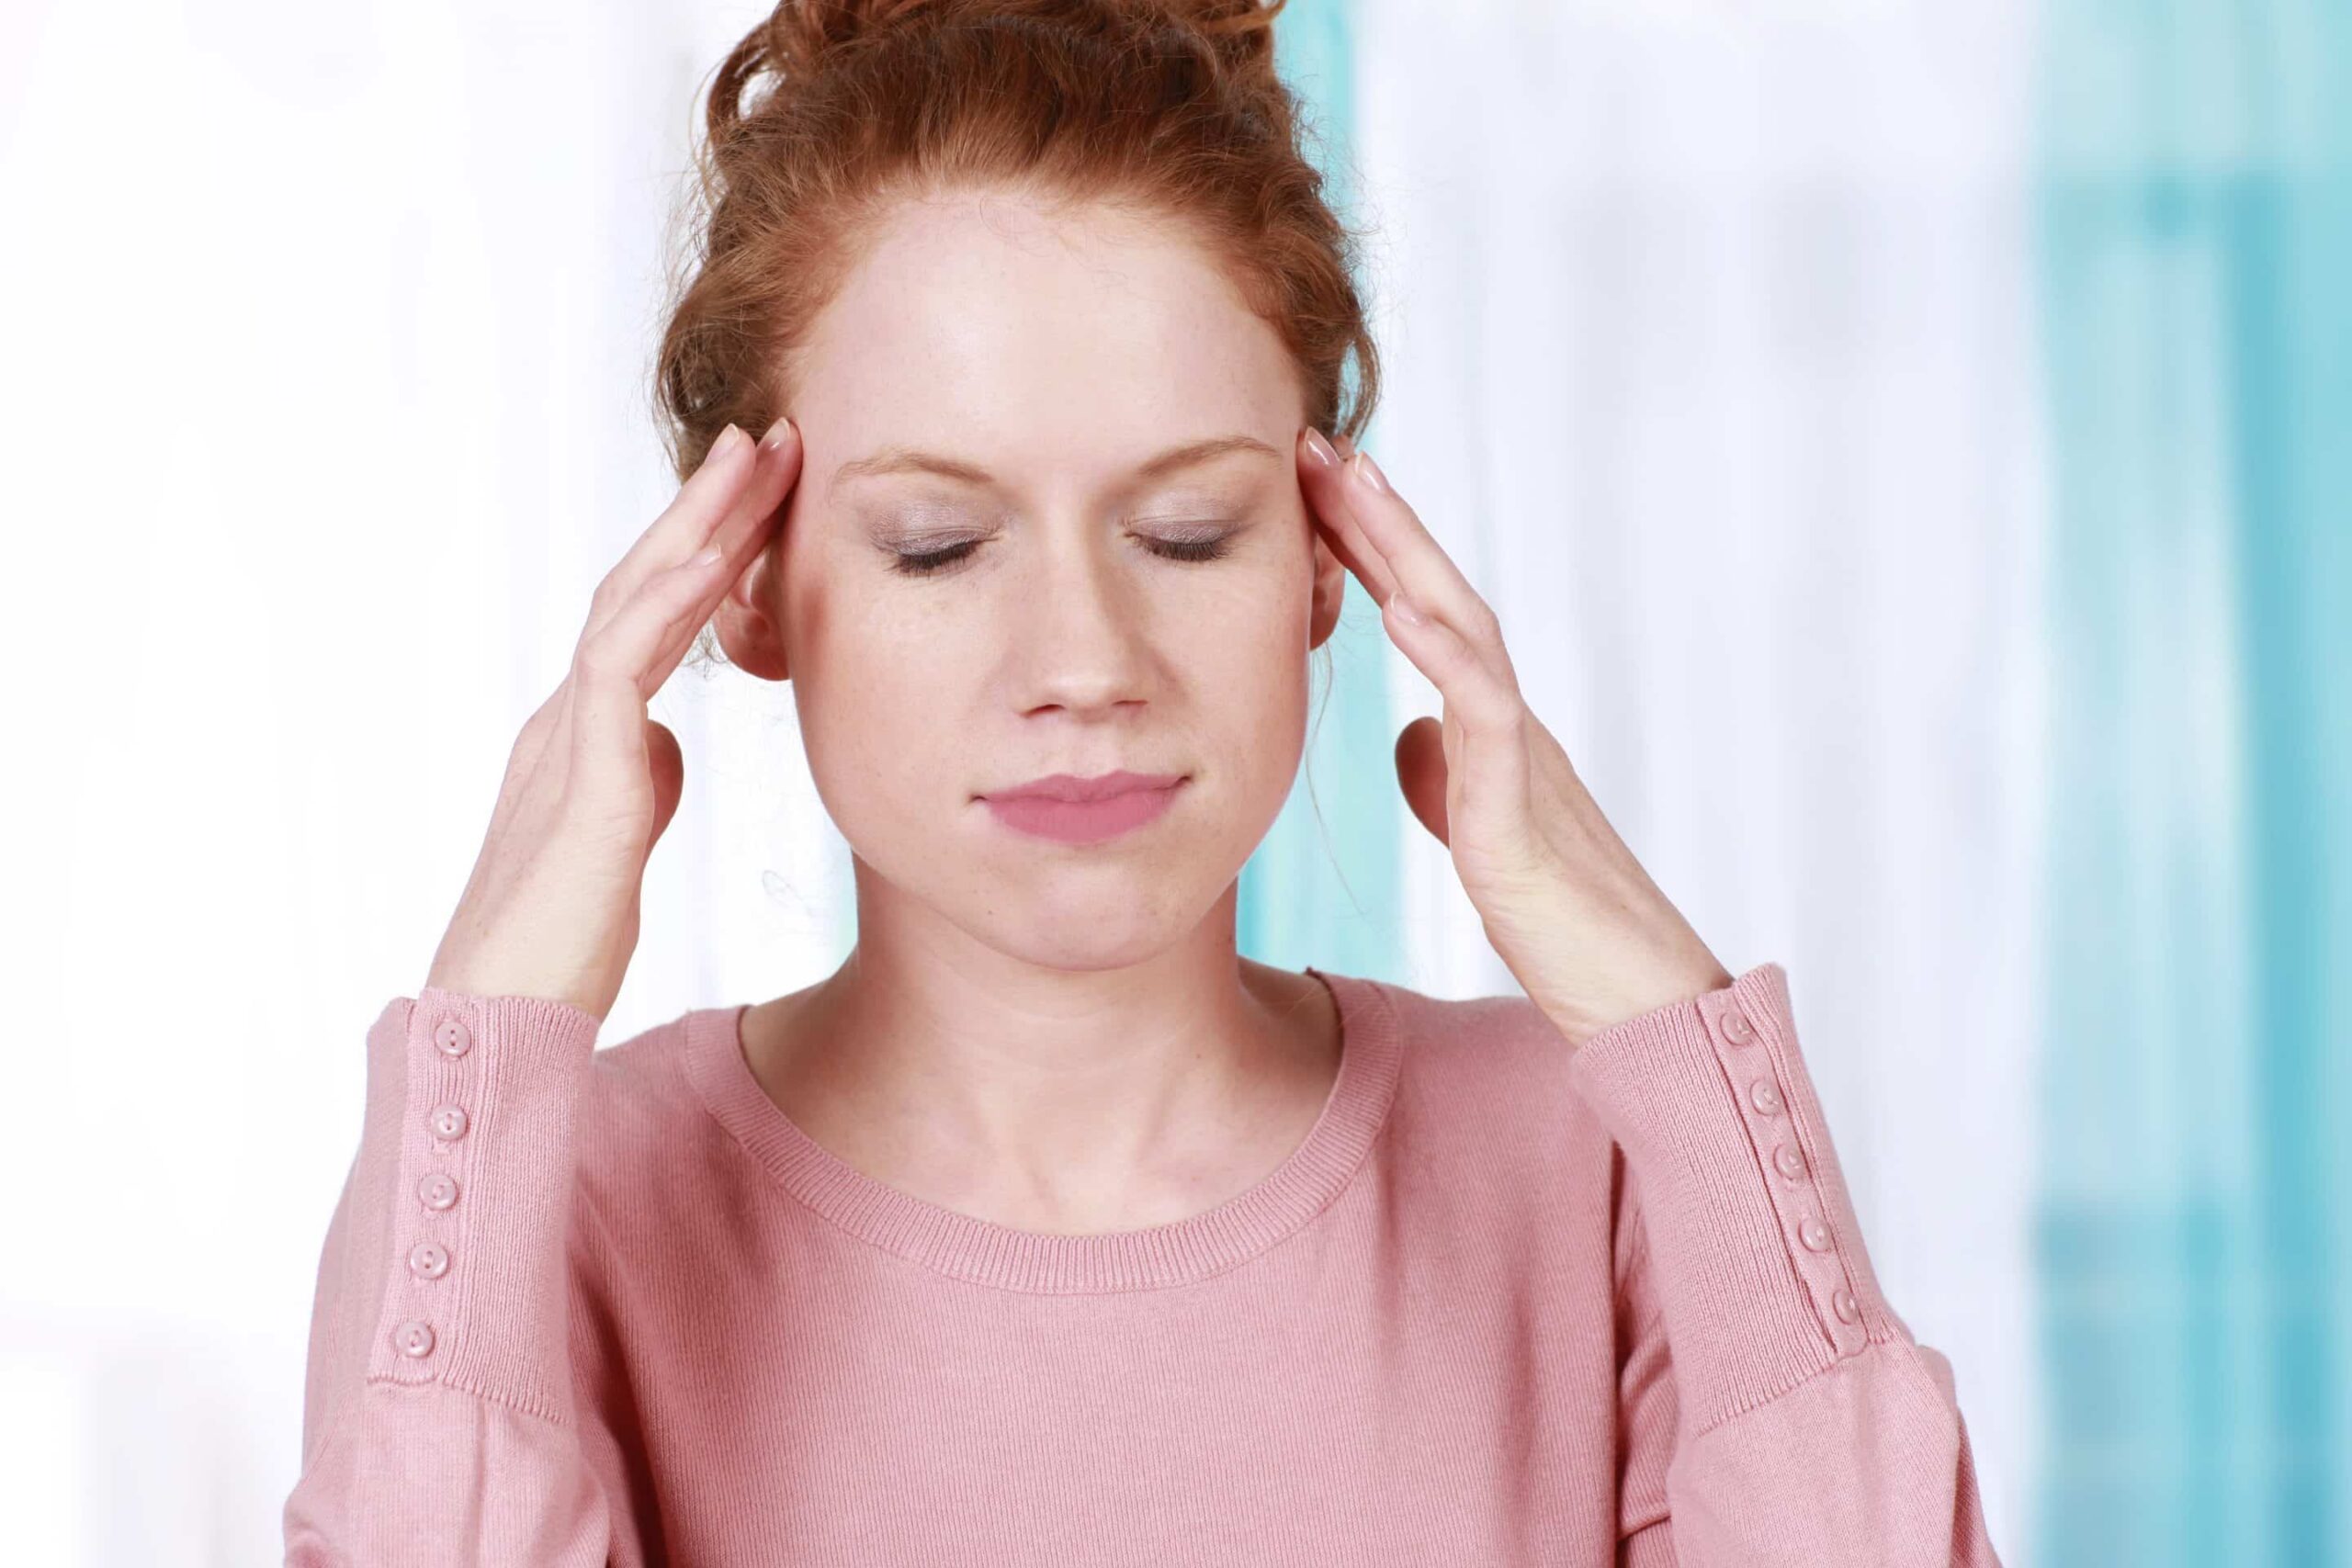 IV Therapy is Beneficial for Patients Suffering from Chronic Headaches and Migraines